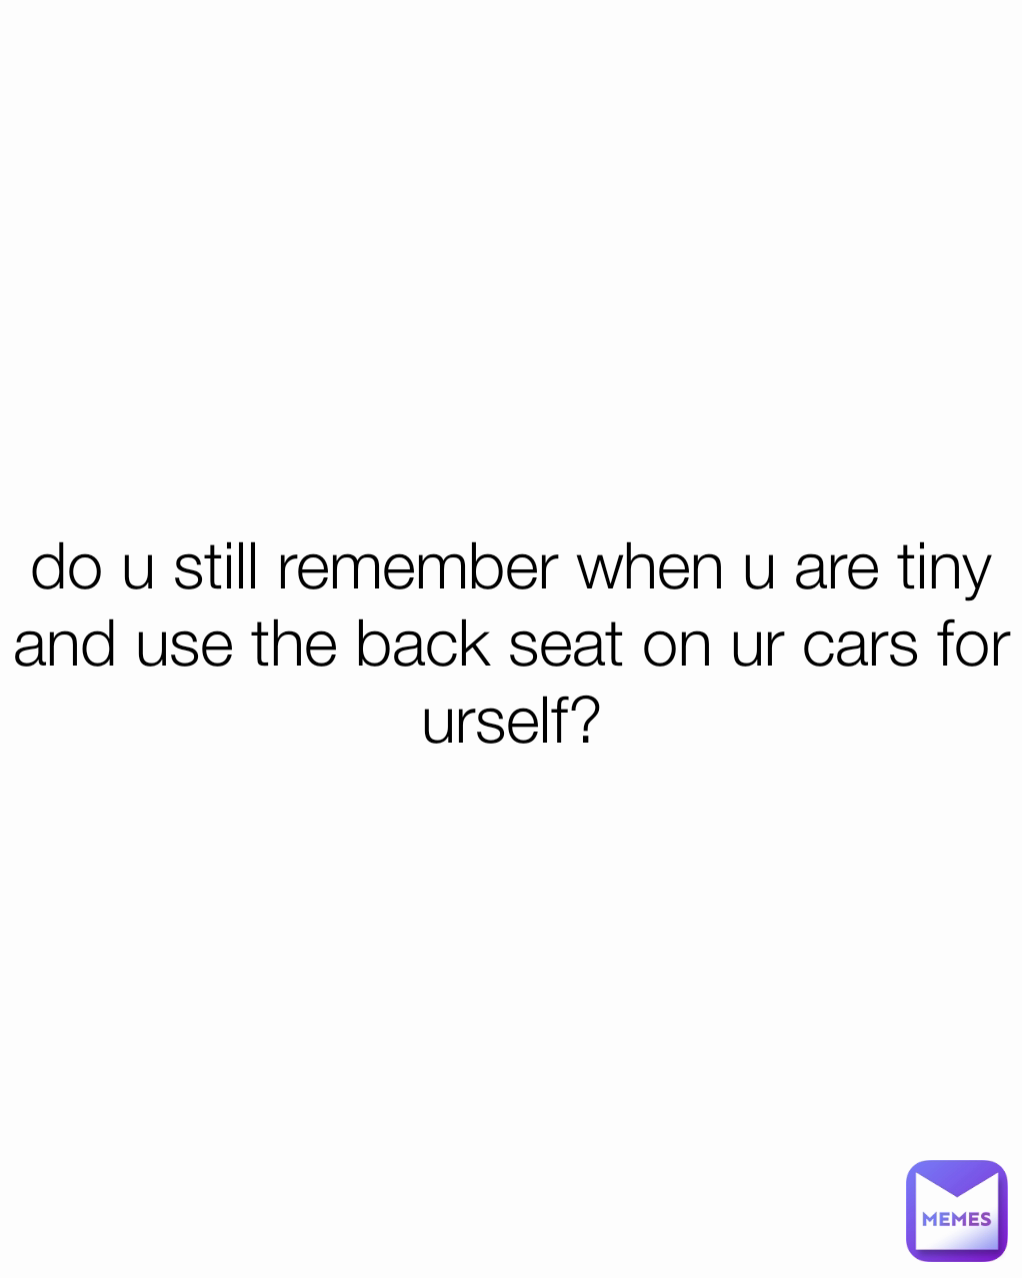 do u still remember when u are tiny and use the back seat on ur cars for urself?